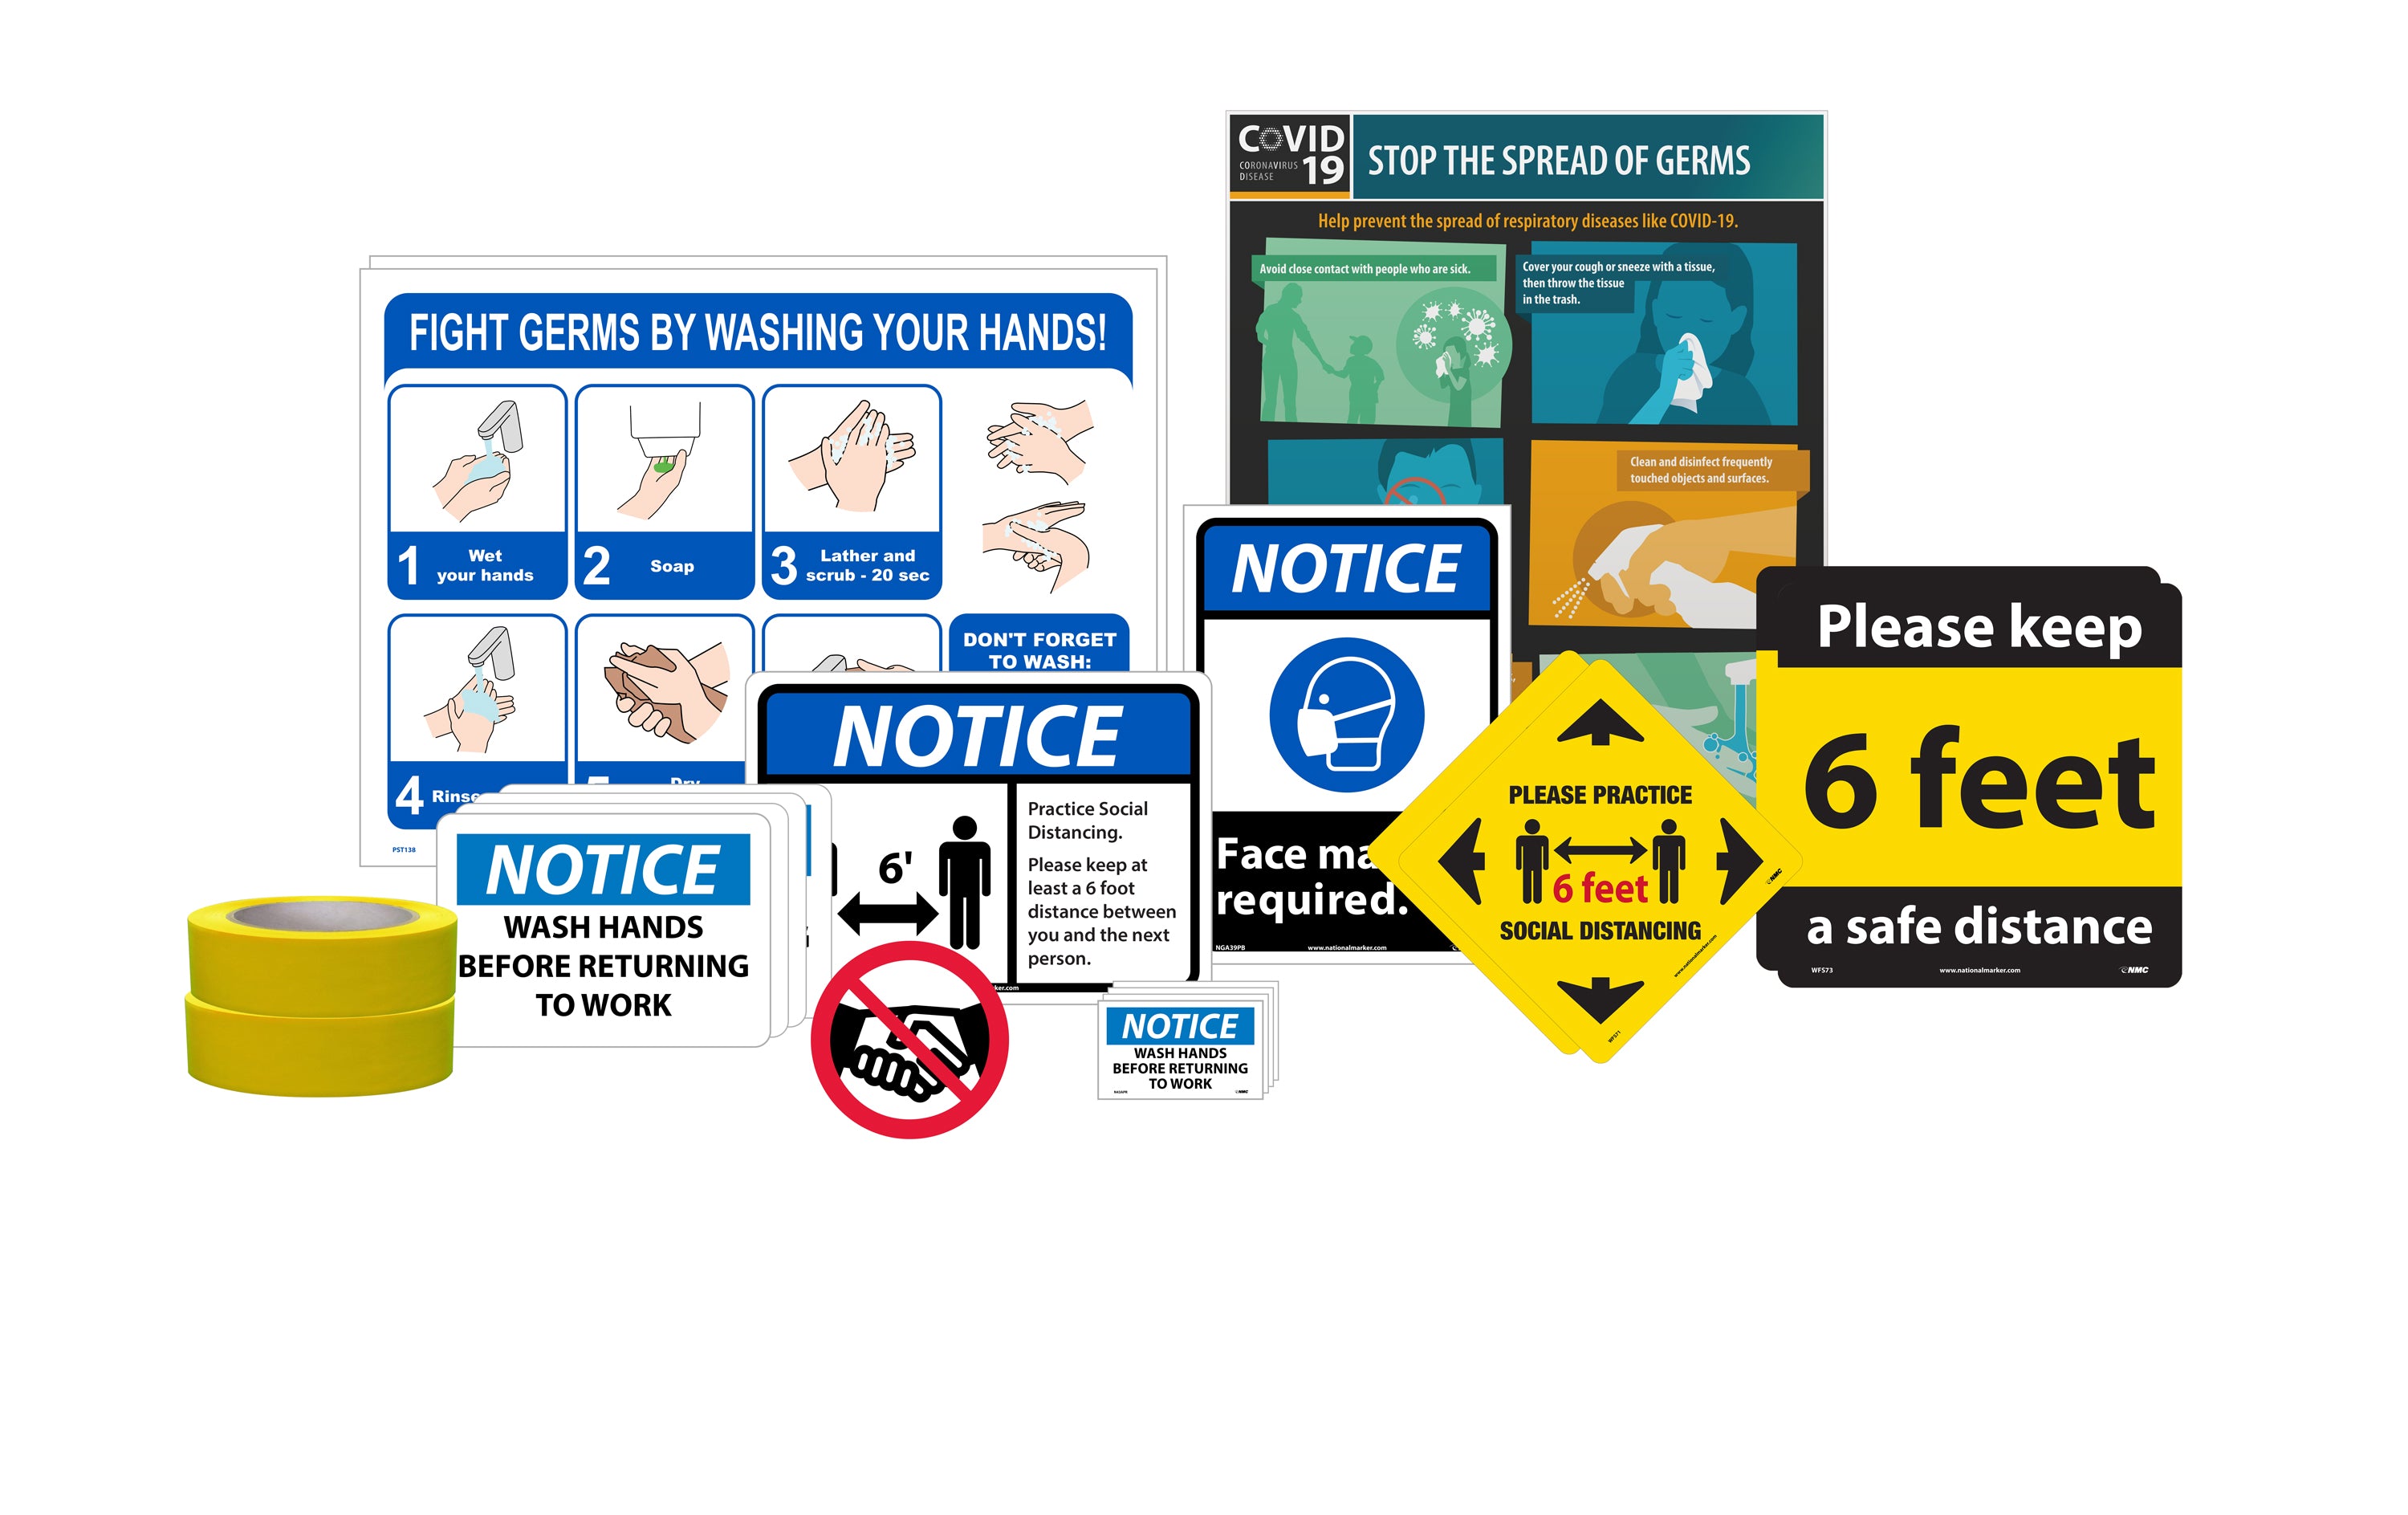 BACK TO WORK KIT, INCLUDES VARIETY OF COVID-19 RELATED SIGNAGE AND IDENTIFICATION PRODUCTS FOR SMALL BUSINESS-eSafety Supplies, Inc